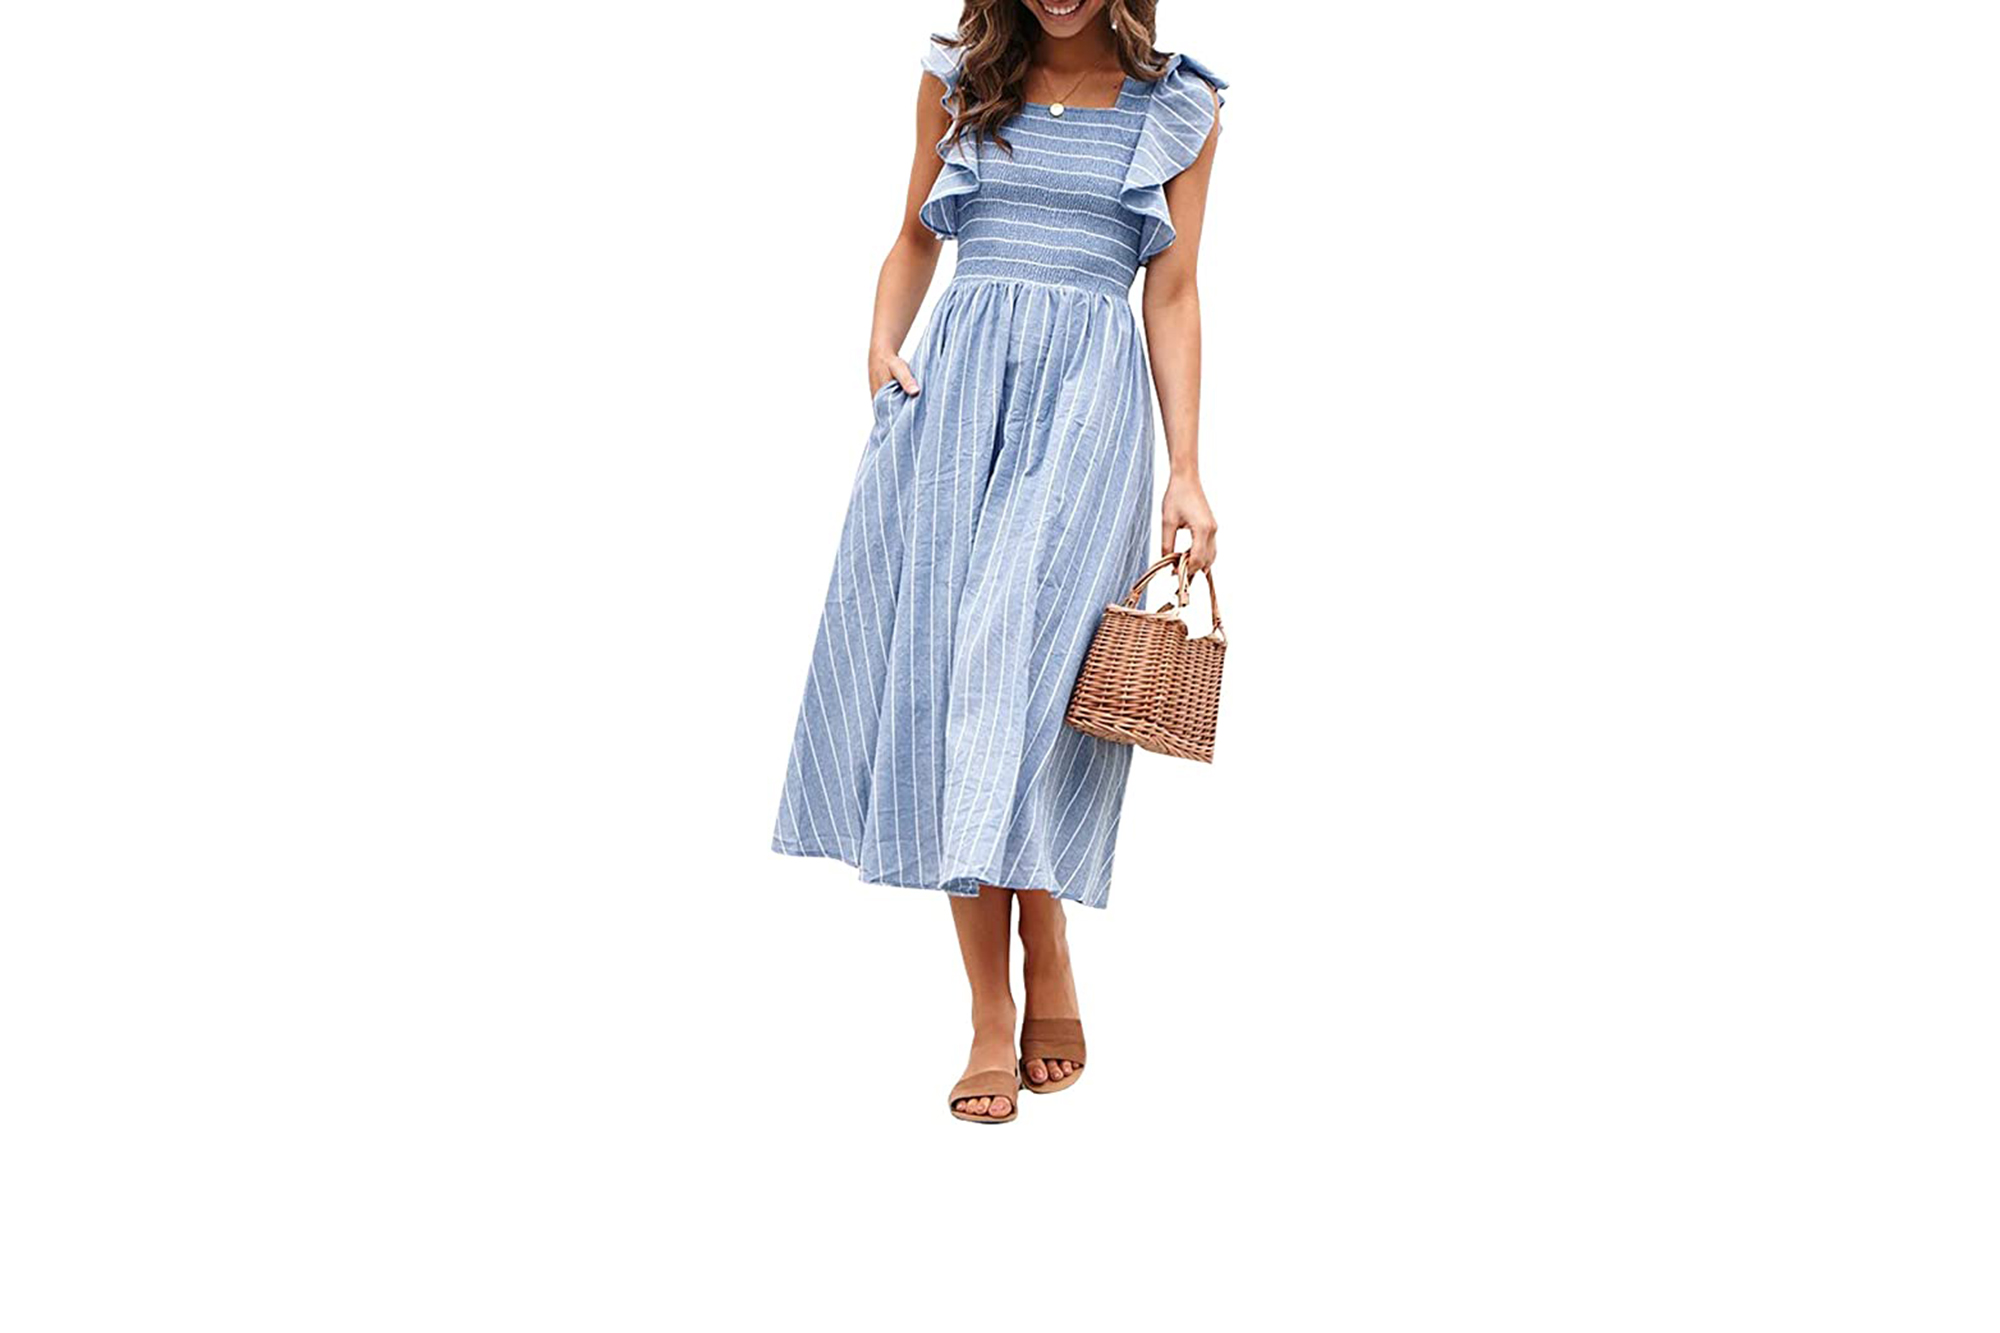 Stay Cool This Summer in This Striped Linen Dress With Pockets